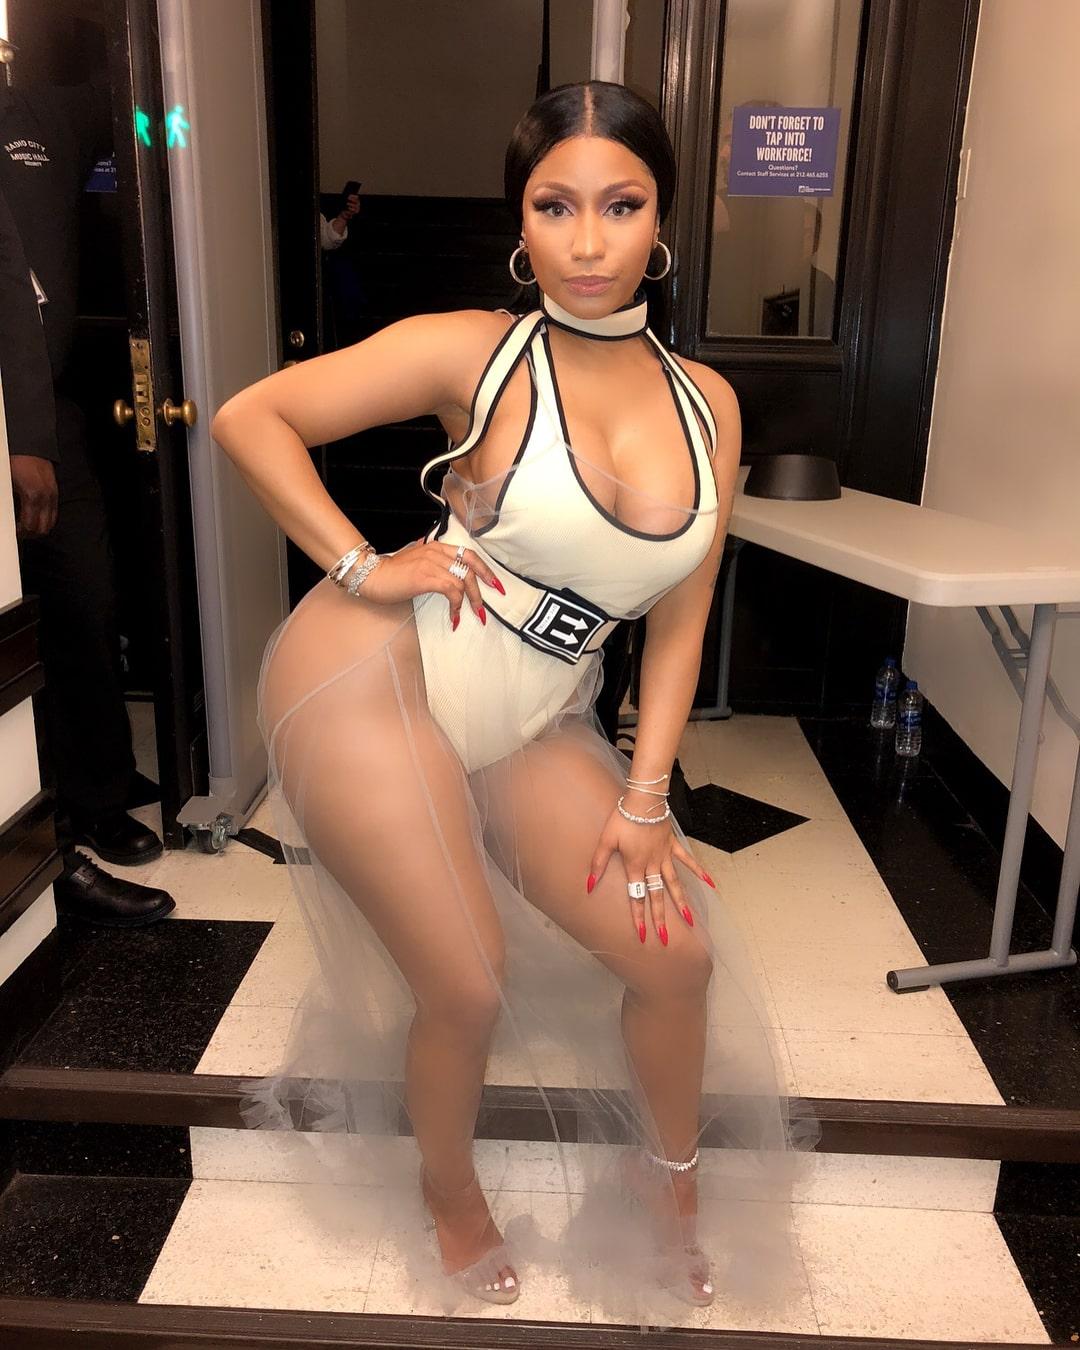 61 Sexy Nicki Minaj Boobs Pictures Are Just Too Damn Delicious | Best Of Comic Books